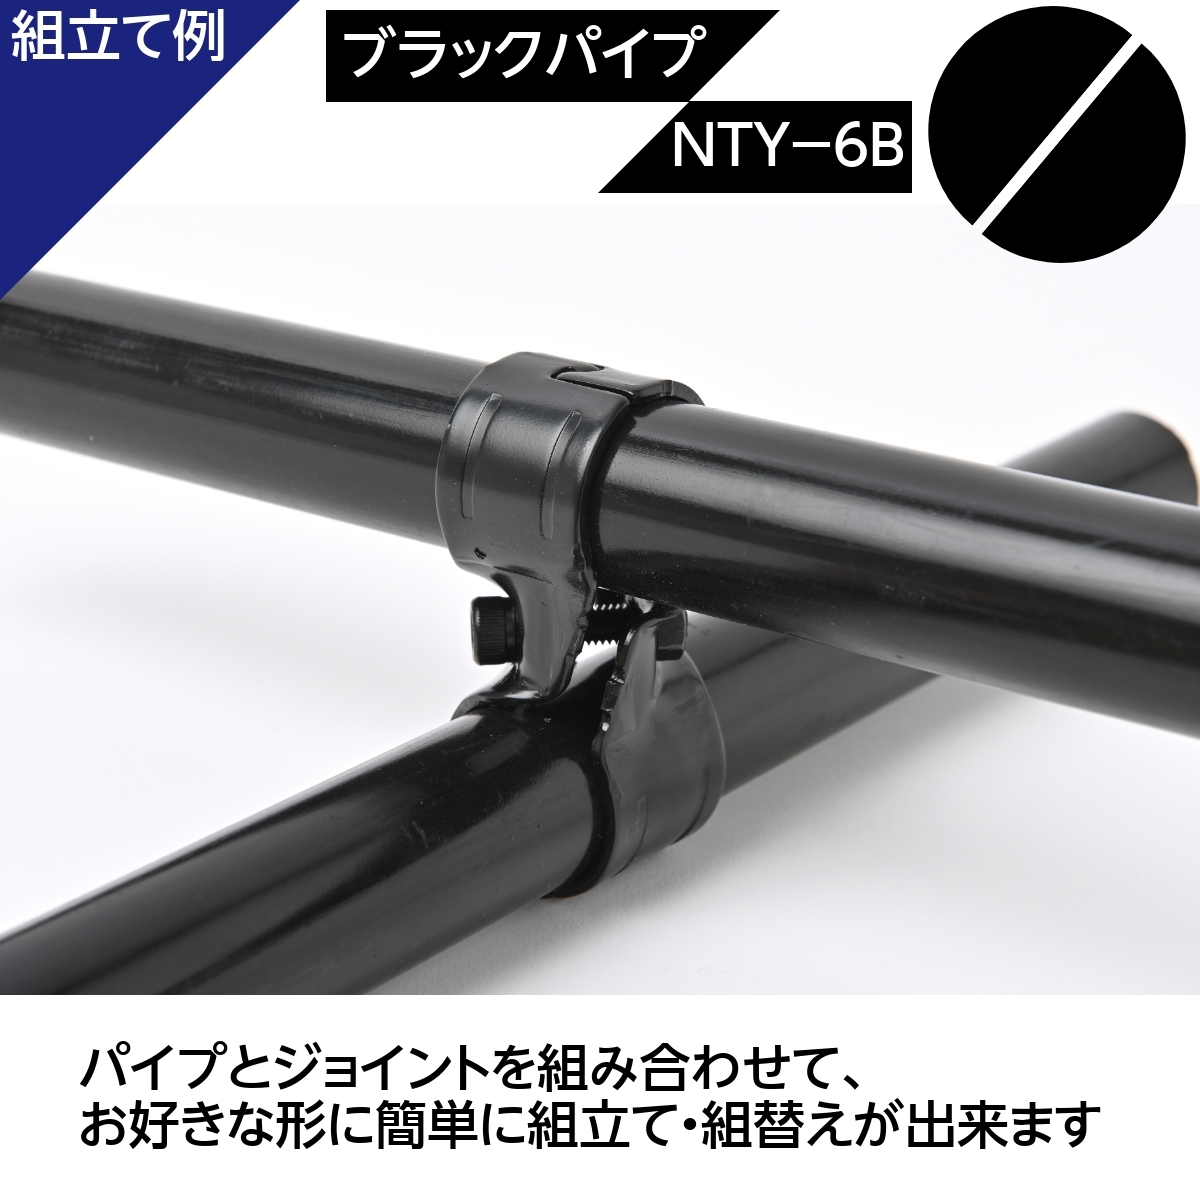 NTY metal joint NTY-6B black Φ28mm for (irekta- metal joint. HJ-6. compatibility equipped ) assembly pipe Cross joint DIY shelves rack 